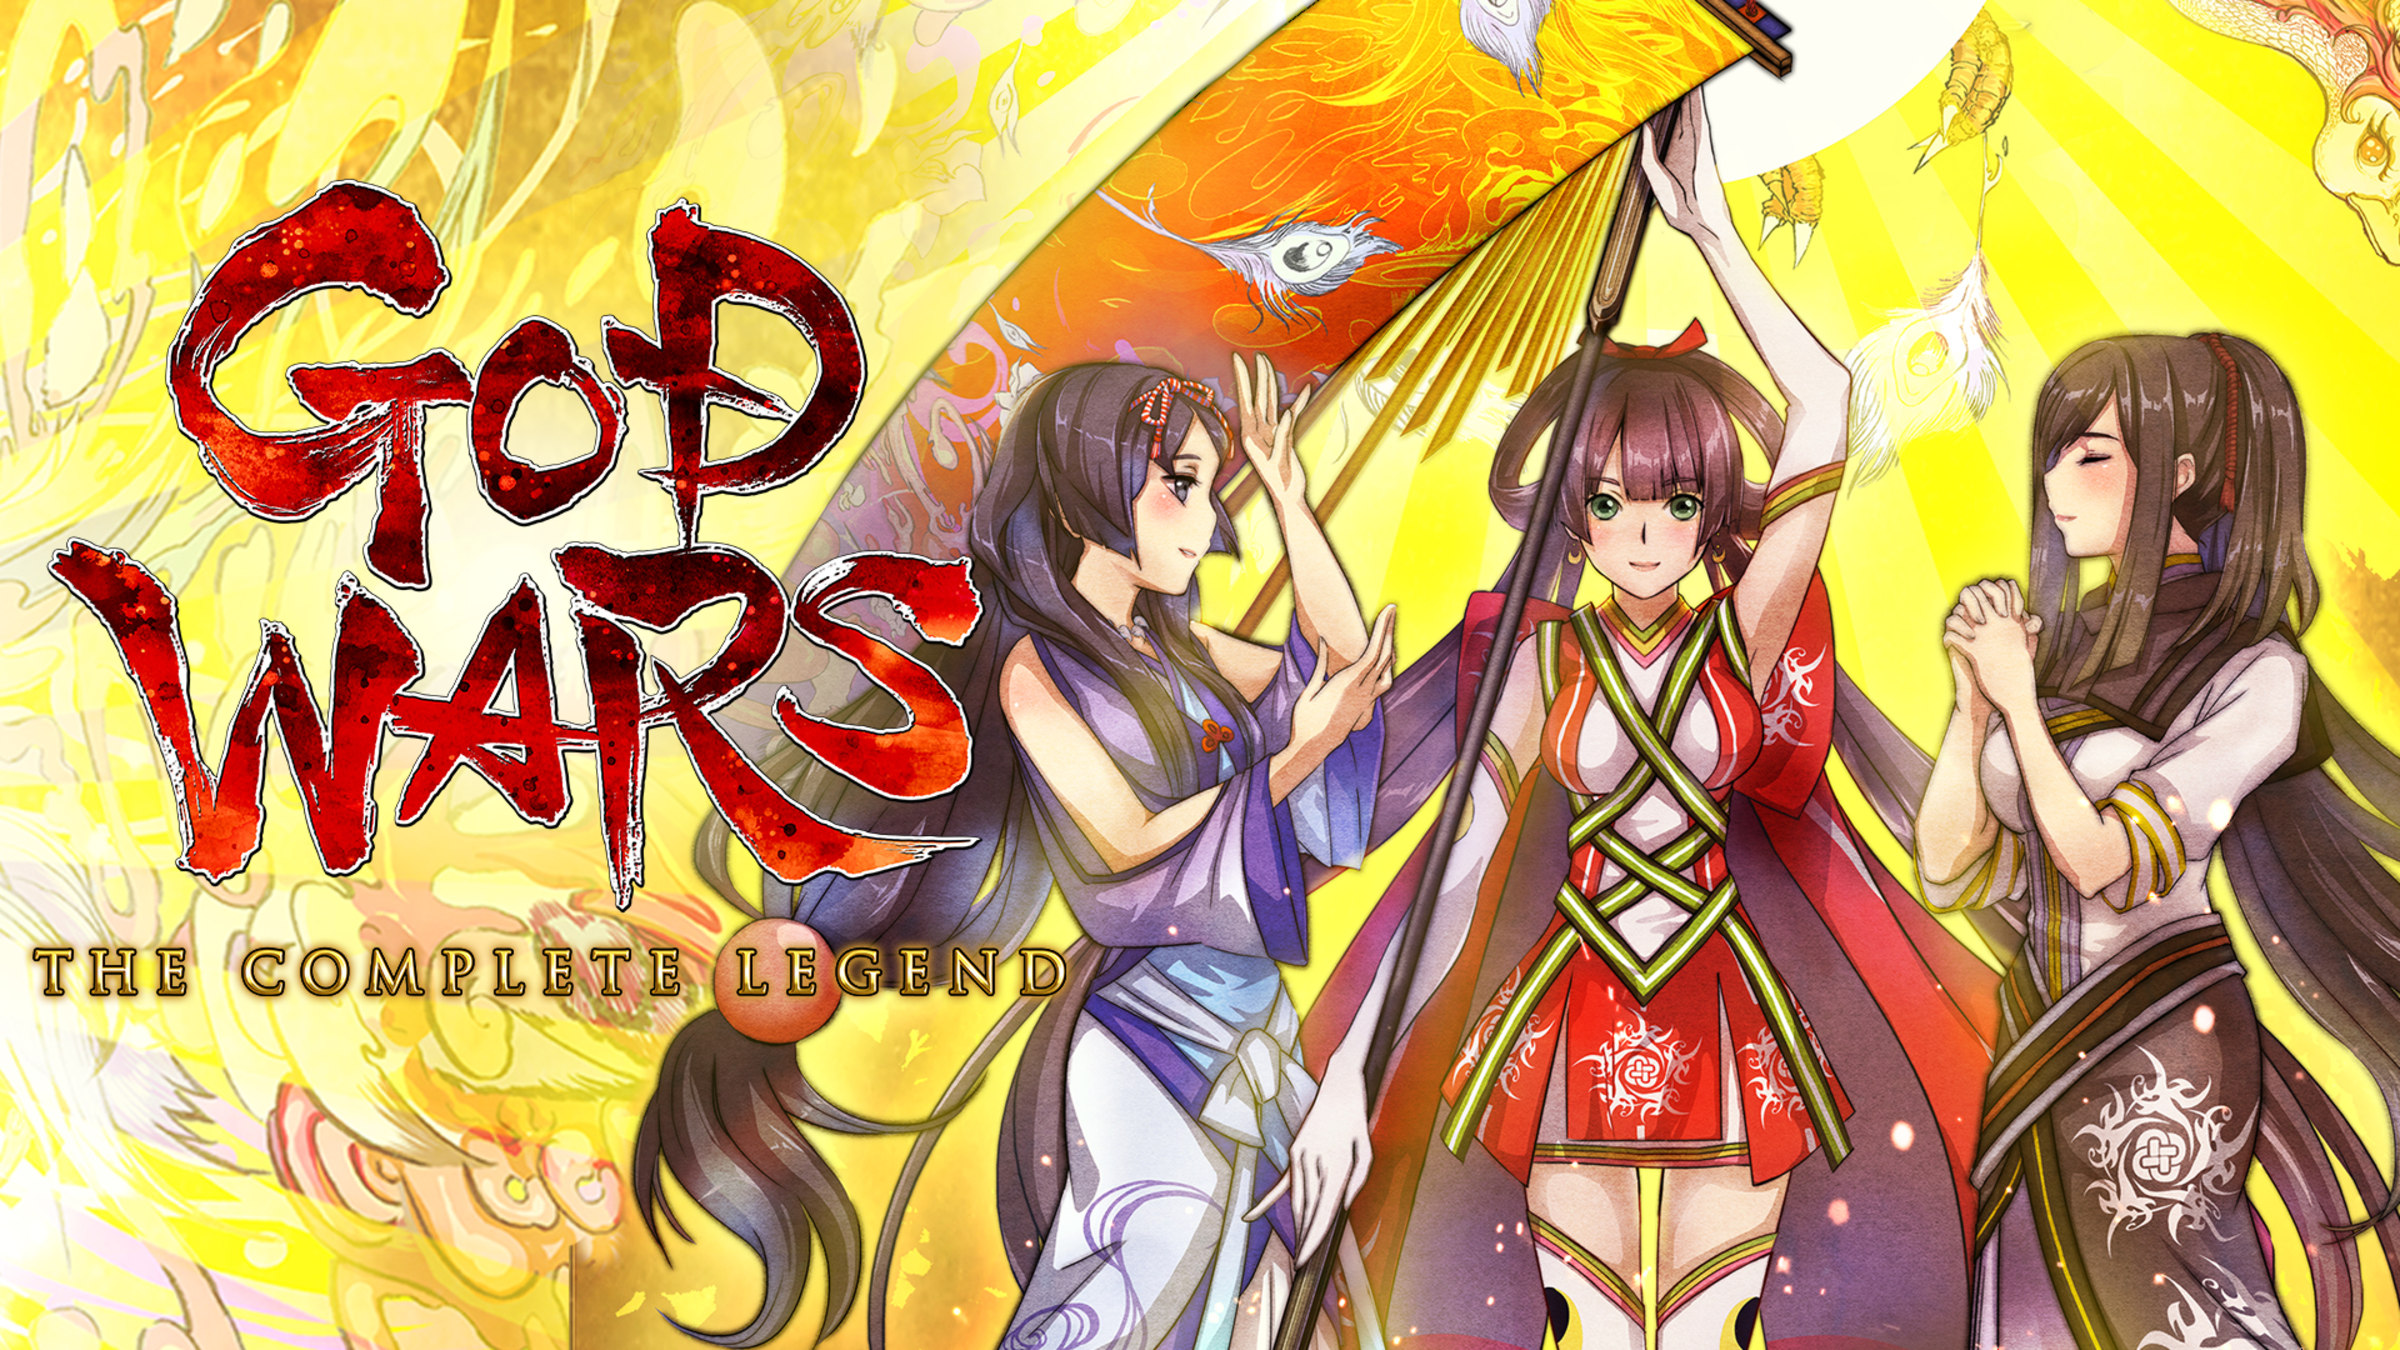 GOD WARS The Complete Legend for Nintendo Switch - Nintendo Official Site